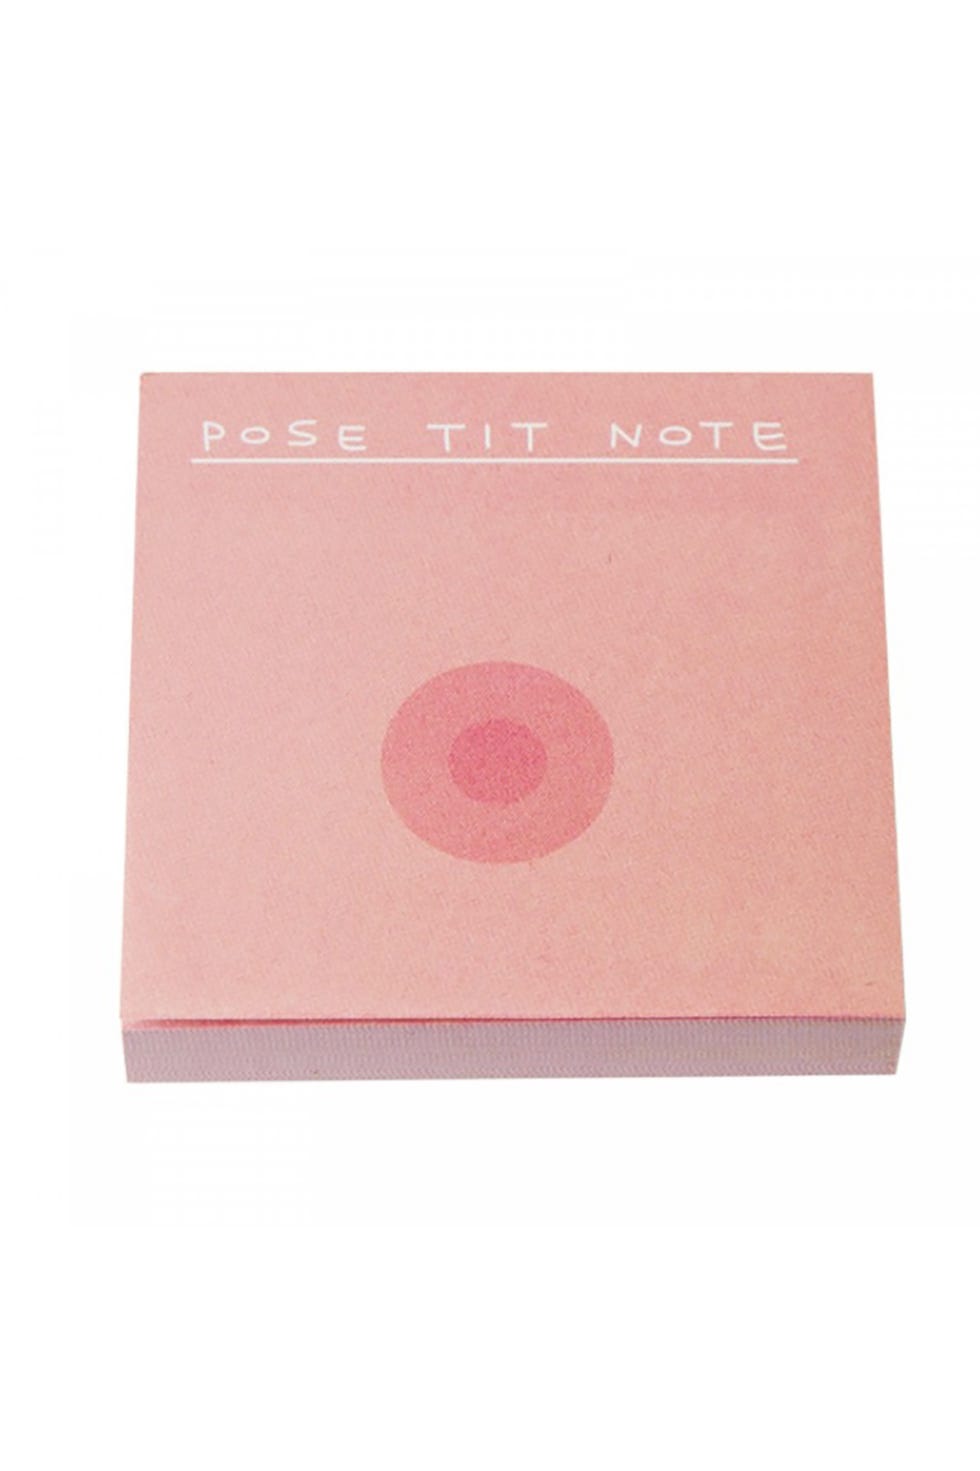 14 bits of cute stationery to take back to college with you